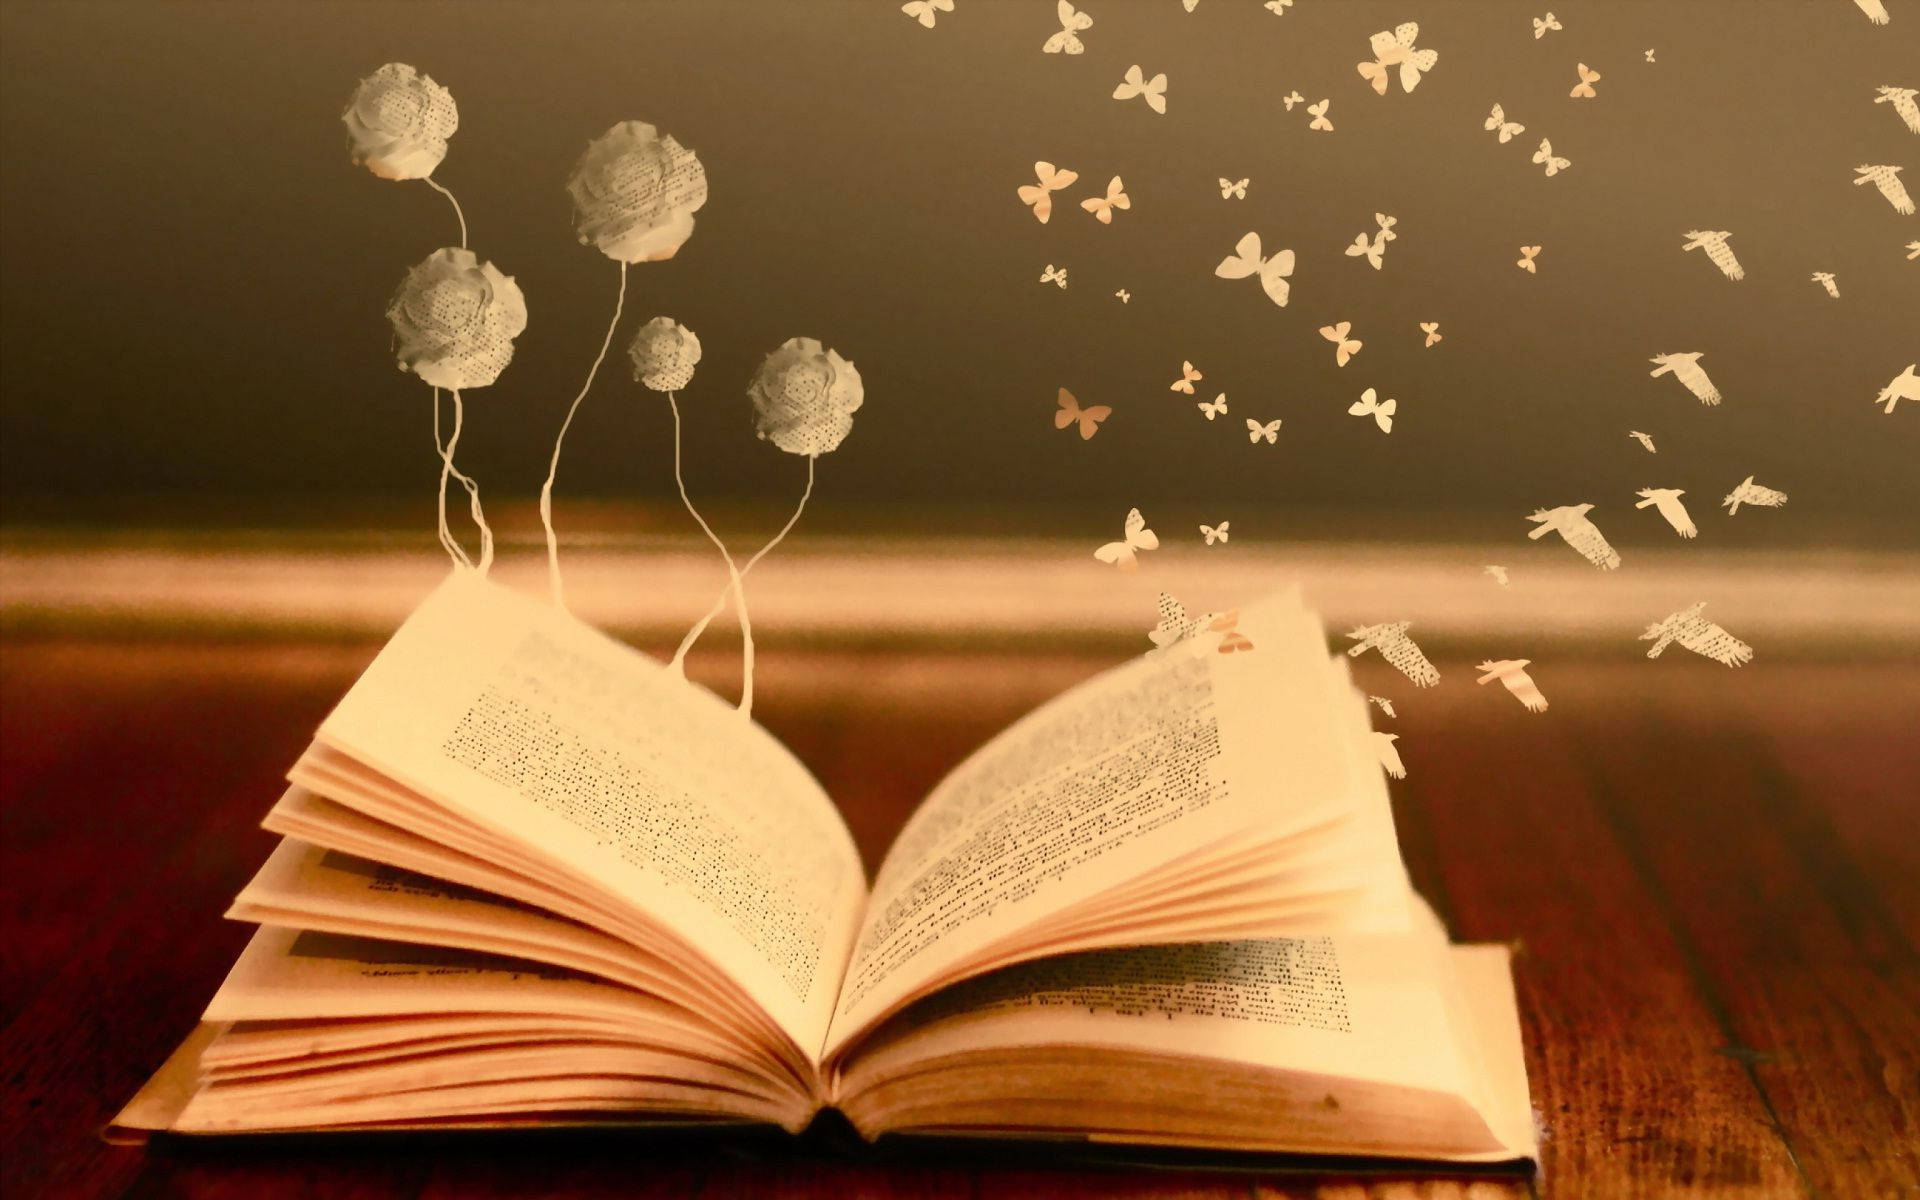 See the beauty of knowledge as butterflies and flowers peer through an open book Wallpaper